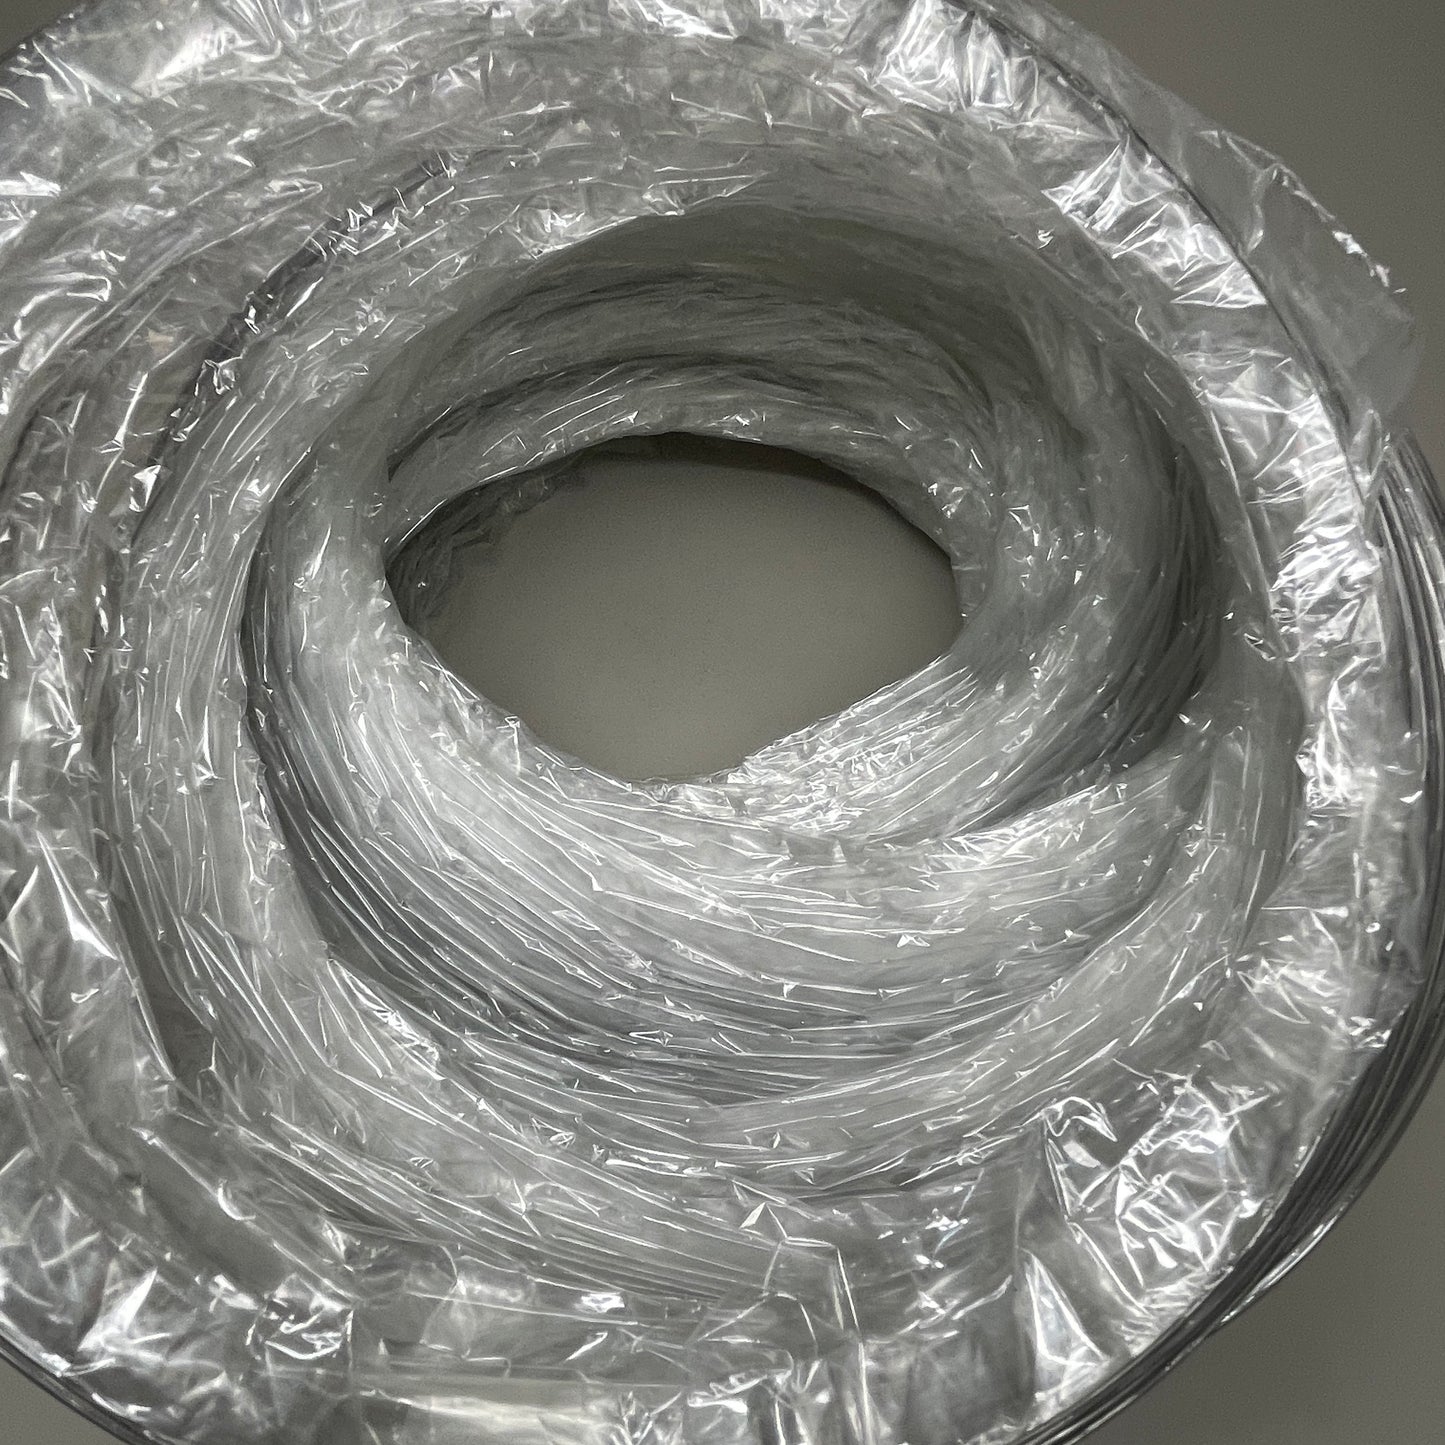 5-PACK! FLEX DUCT 10" x 25' Clear for HVAC C1025 (new)